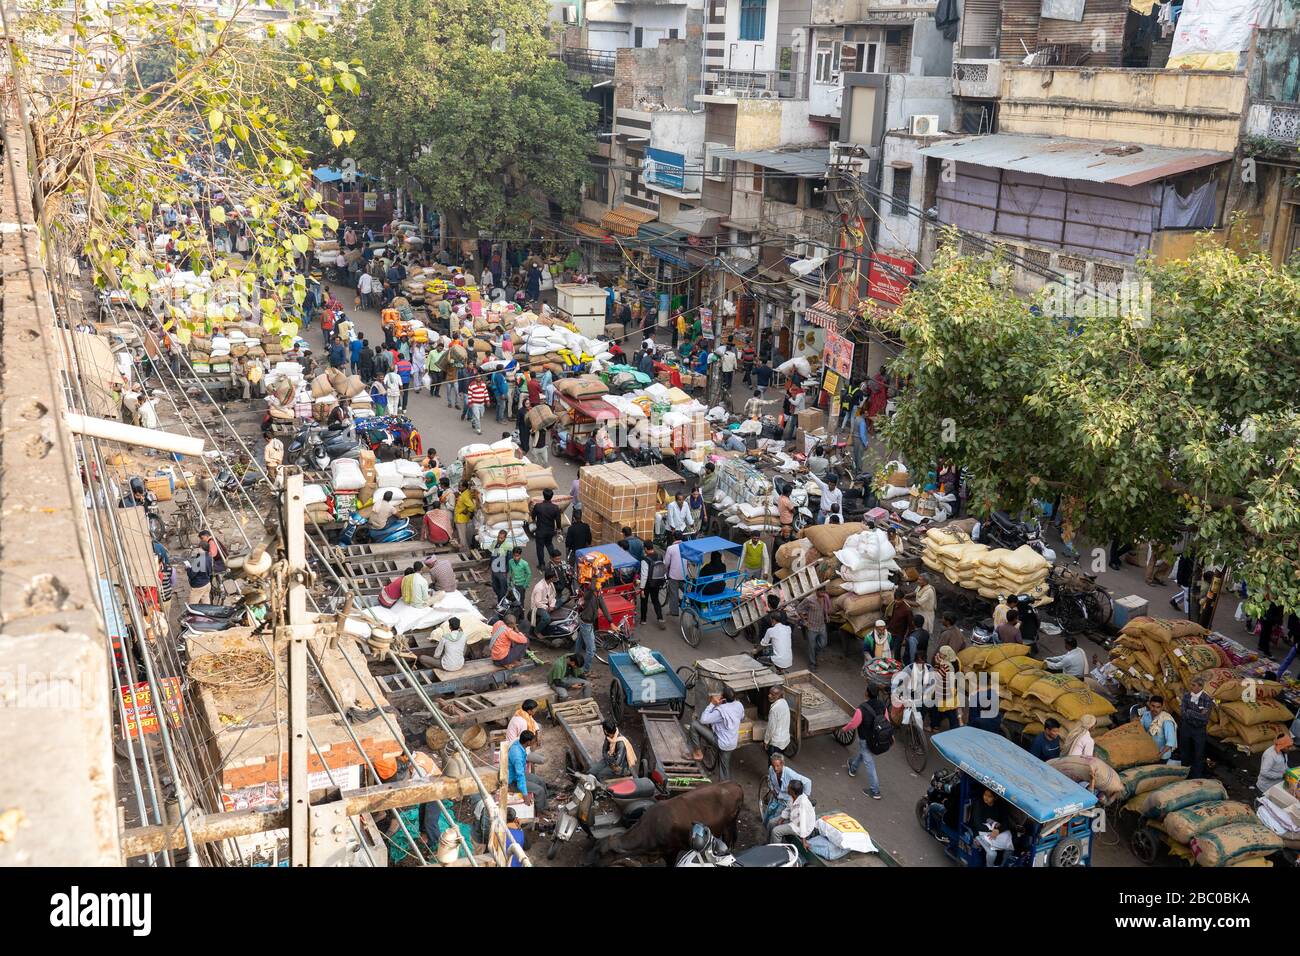 Busy street in Old Delhi, India Stock Photo